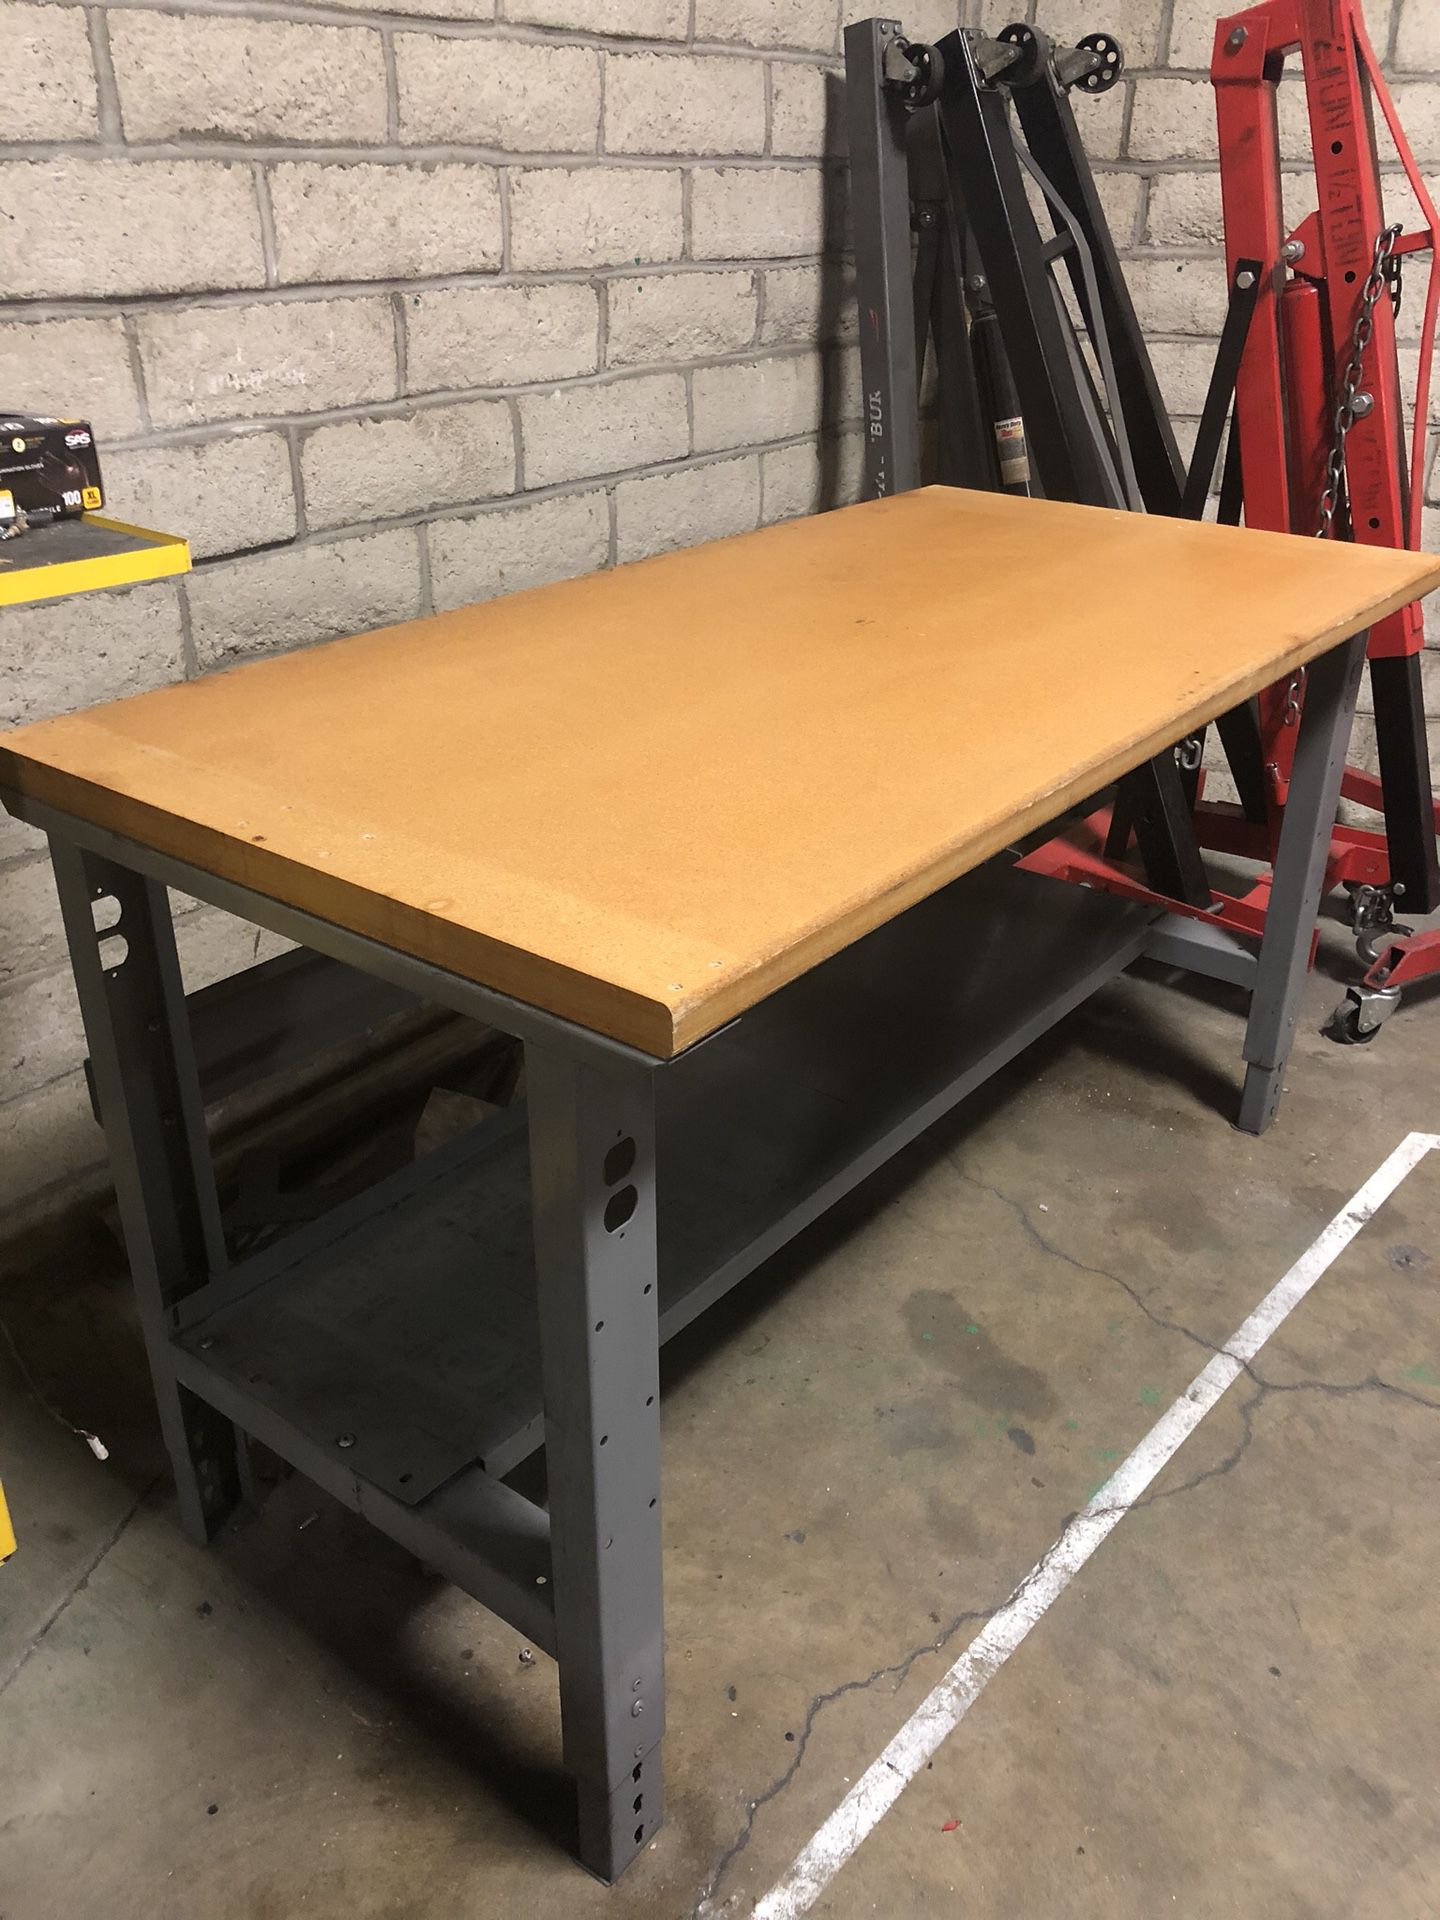 Heavy Duty Uline Metal Work Table w/ Thick Wood Top - Great for Skilled Handy Work - Technicians Automotive Bench Warehouse Equipment